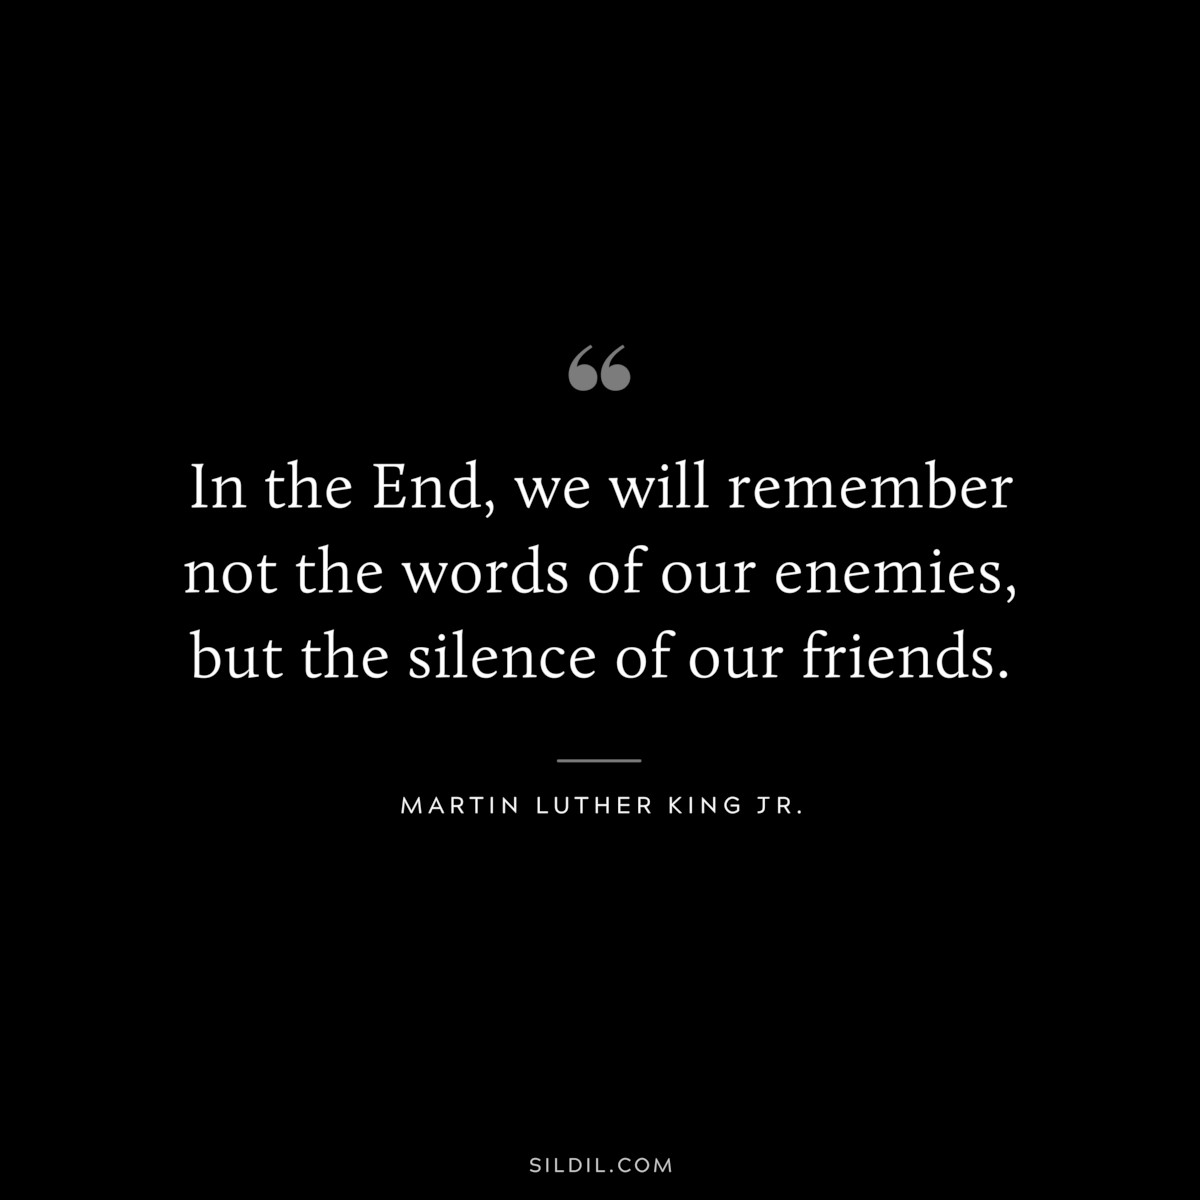 In the End, we will remember not the words of our enemies, but the silence of our friends. ― Martin Luther King Jr.